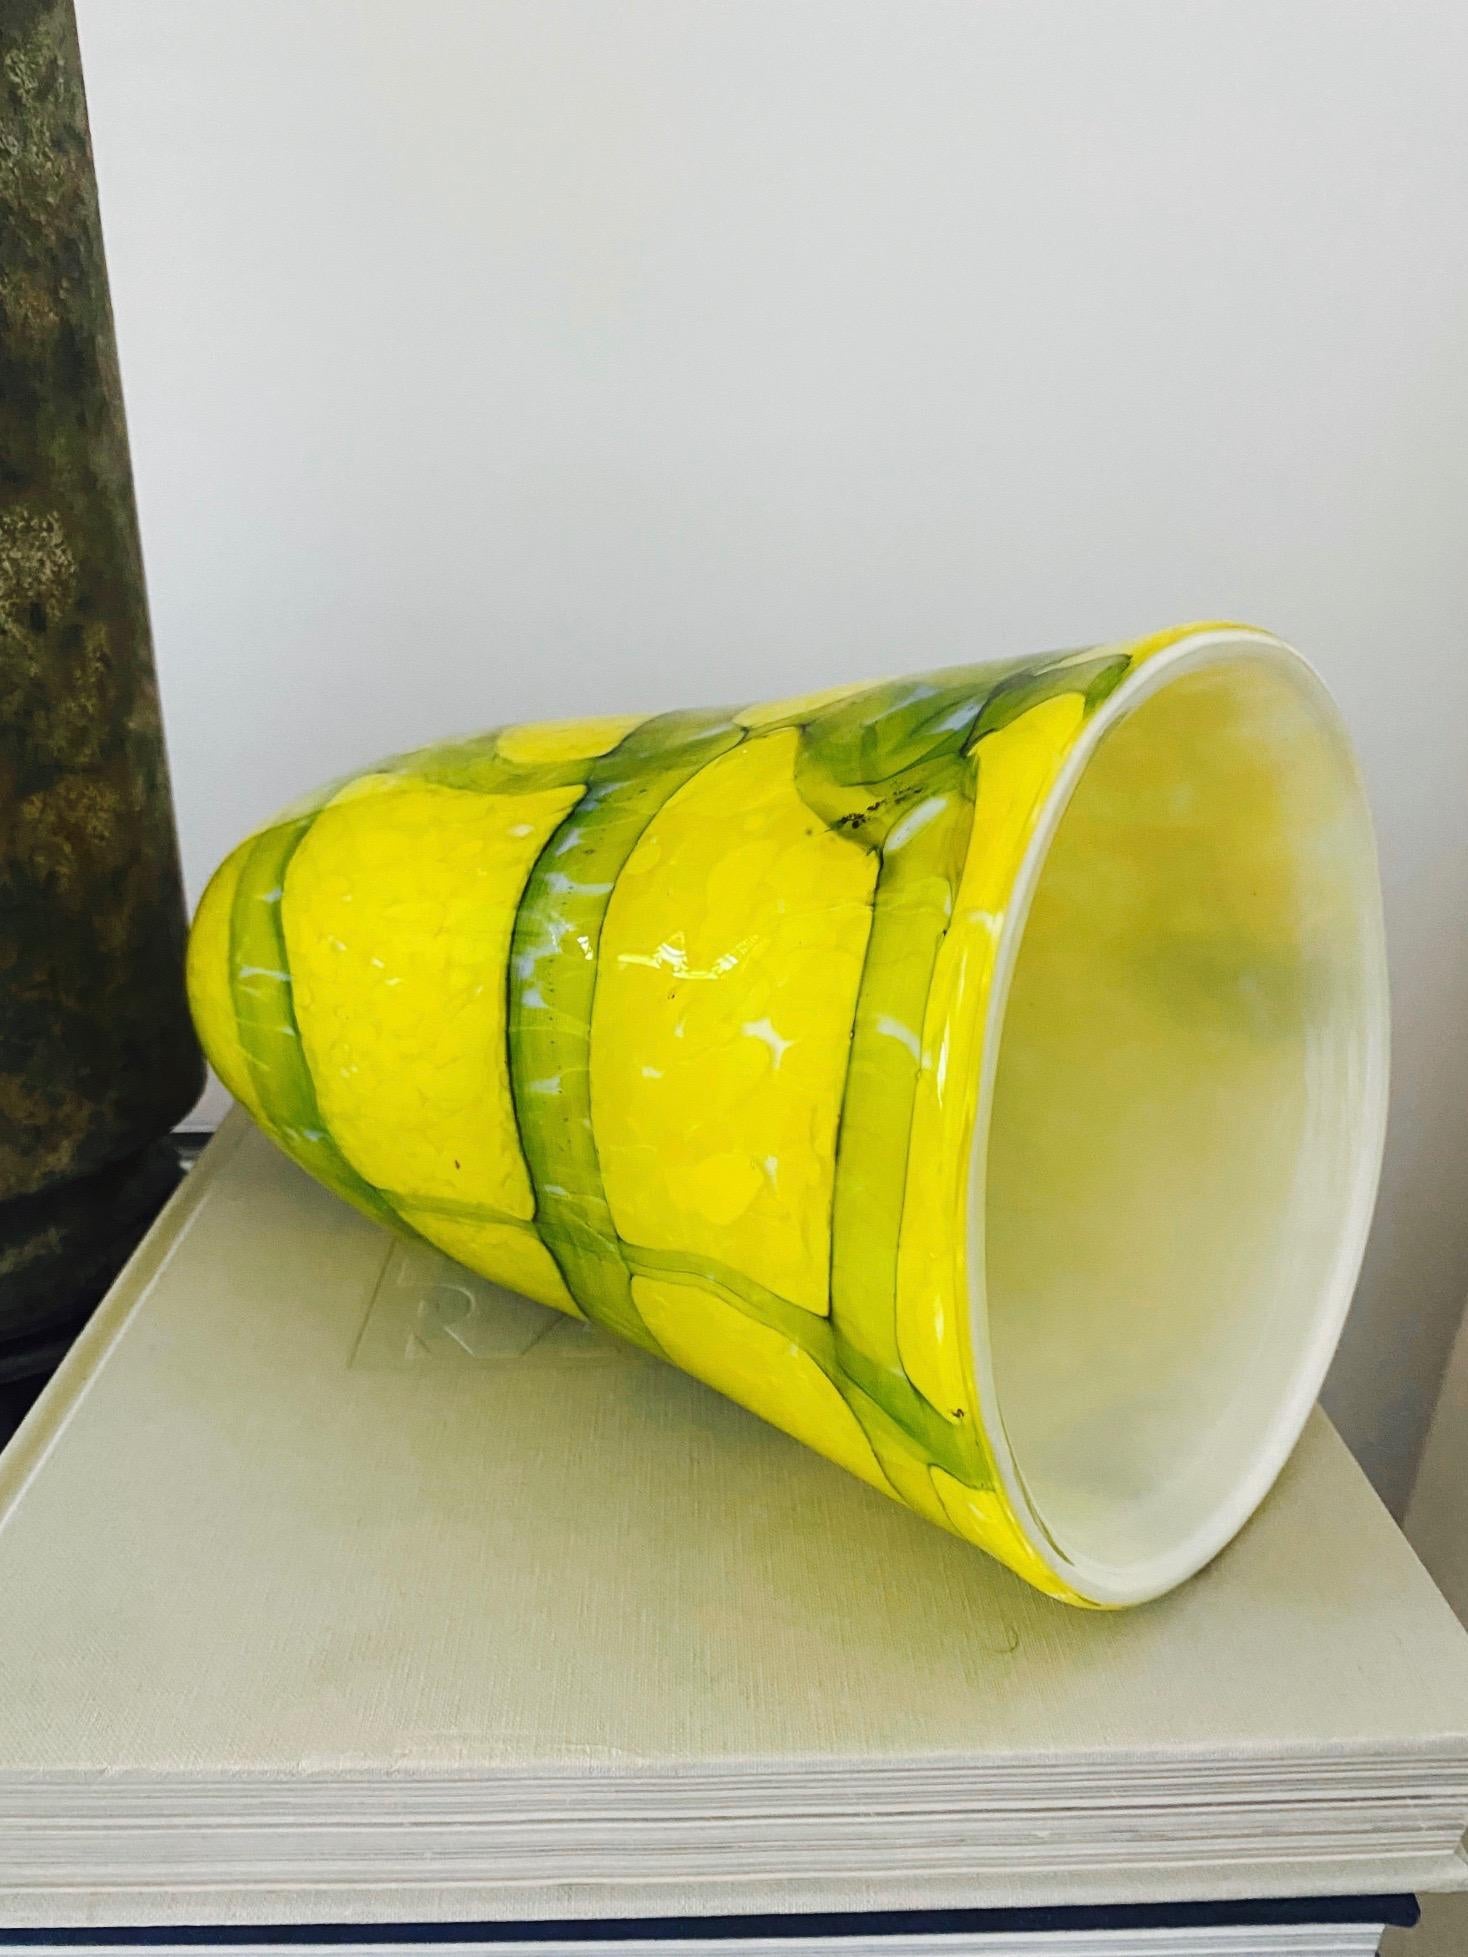 Abstract Murano Glass Vase by Fratelli Toso in Yellow and Green, c. 1980 For Sale 3